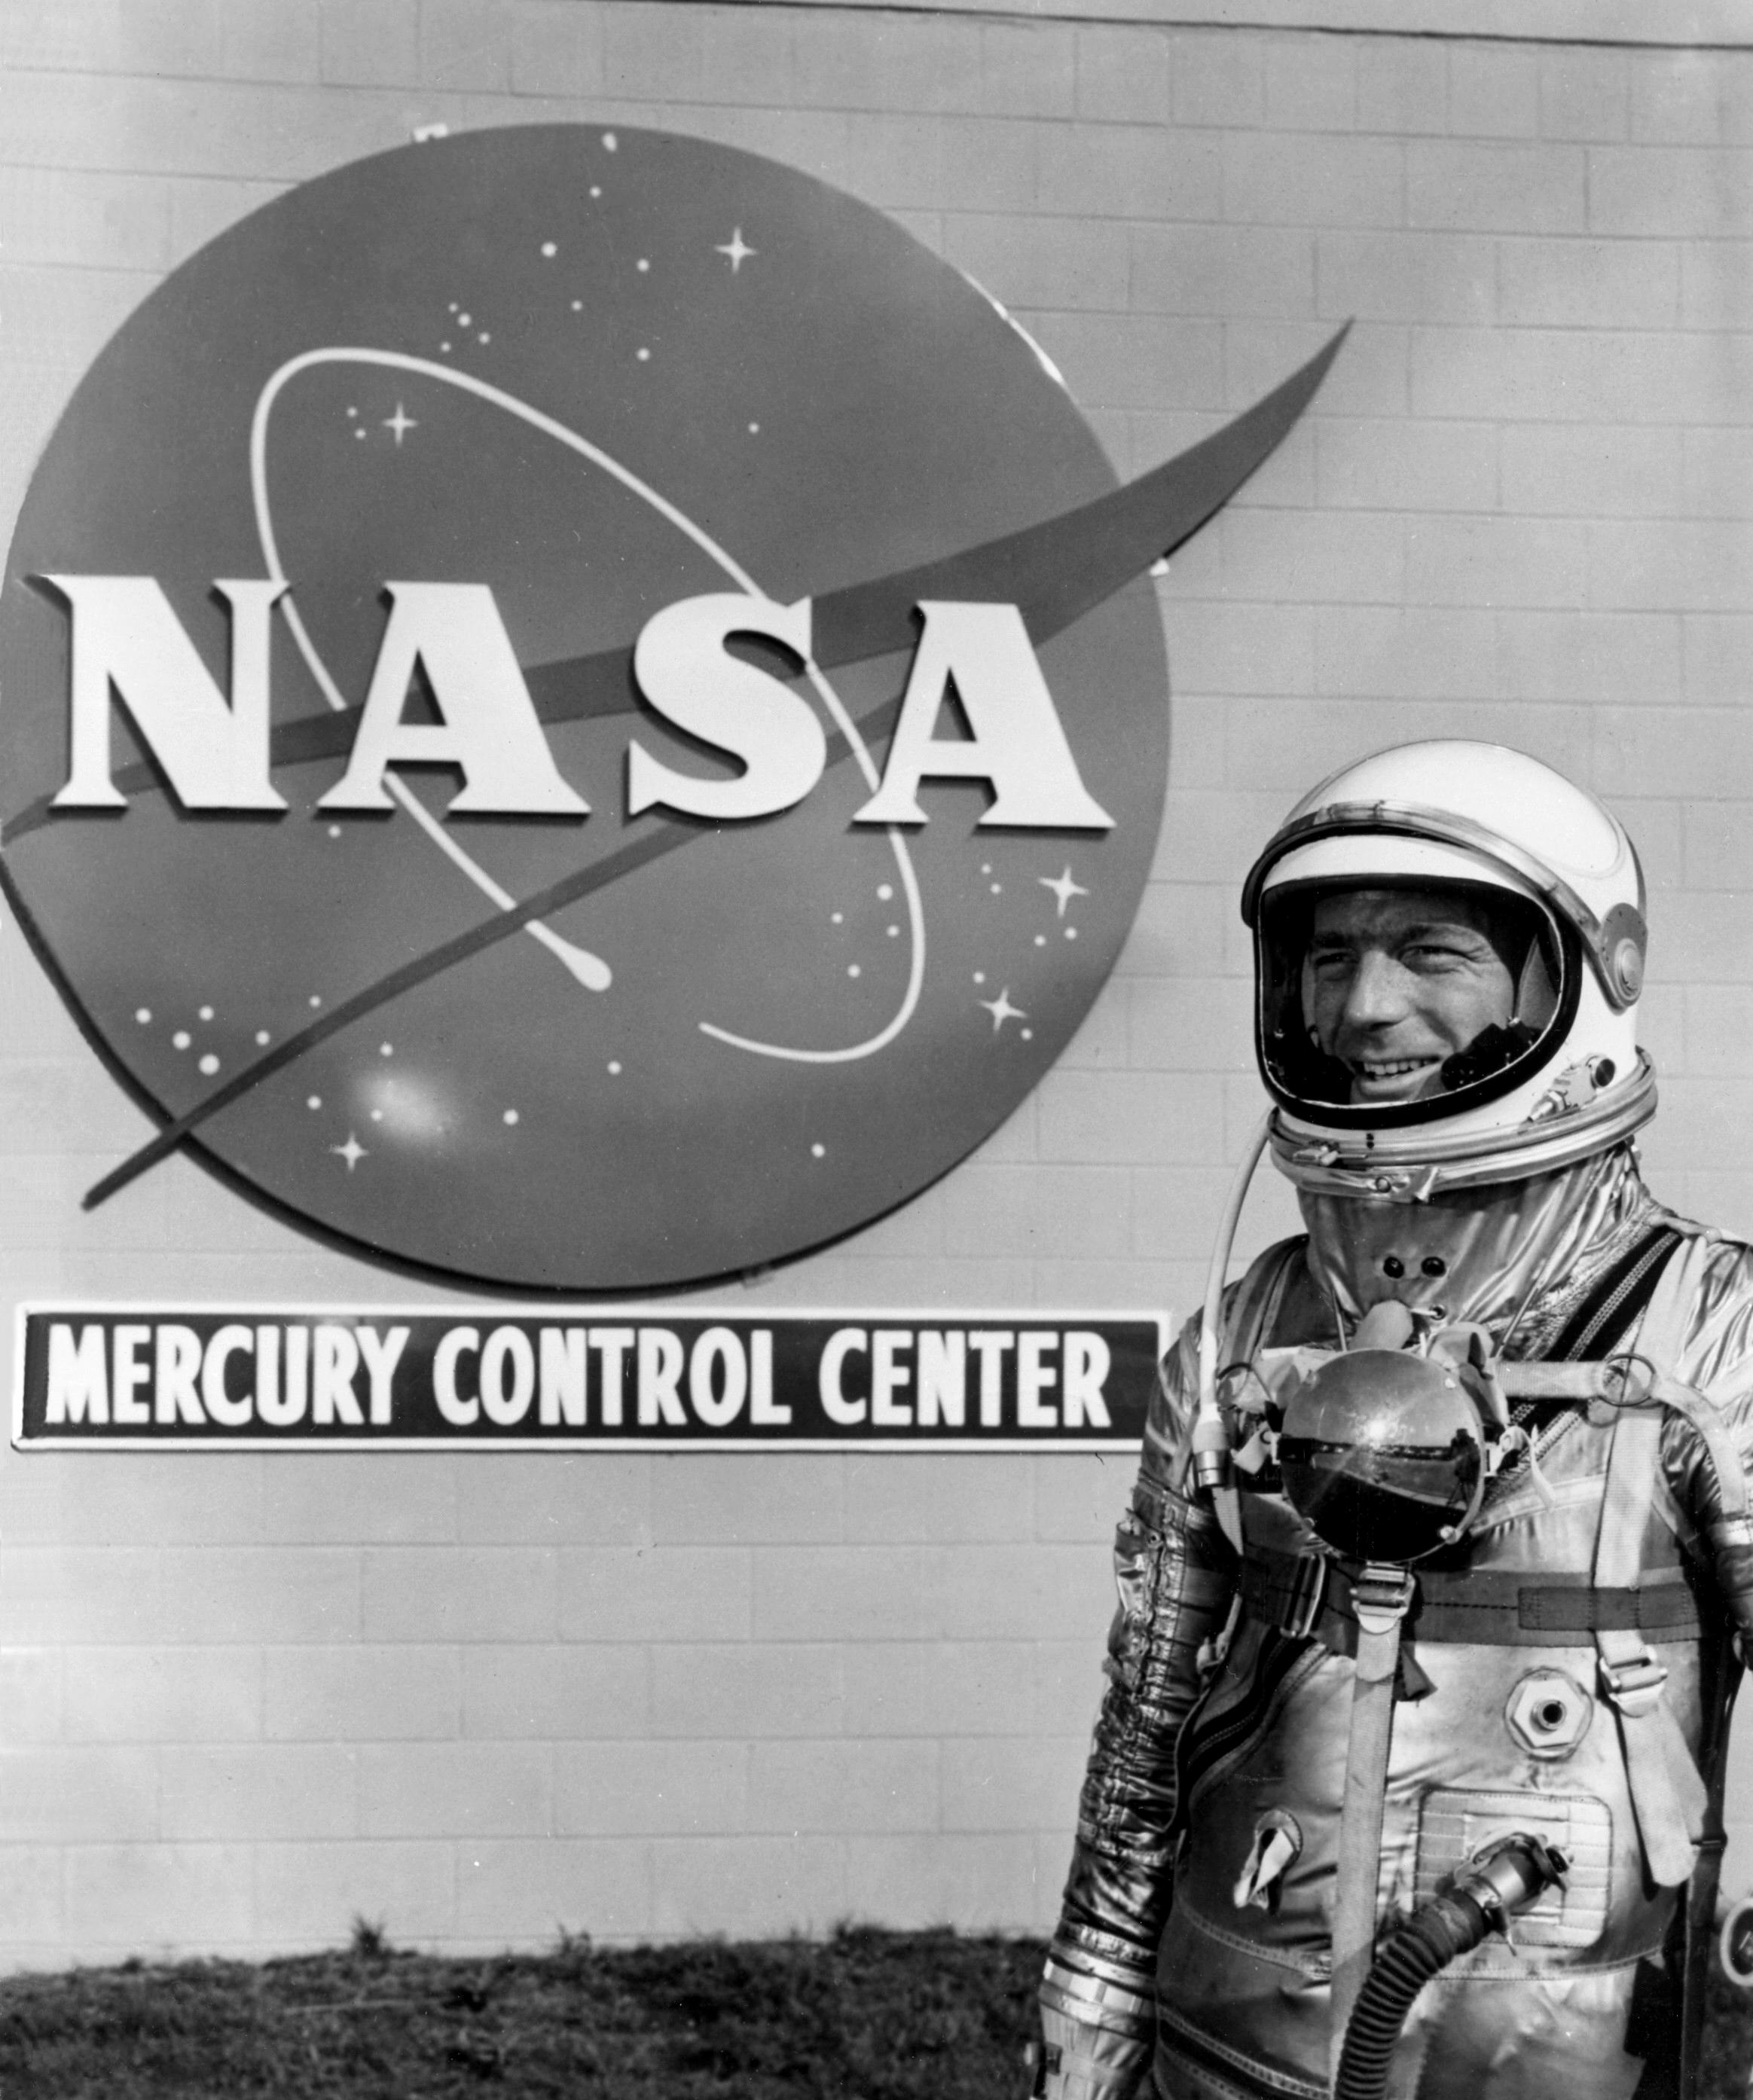 Astronaut Scott Carpenter poses in his flight suit in front of the NASA logo on the side of the Mercury Control Center at Cape Canaveral